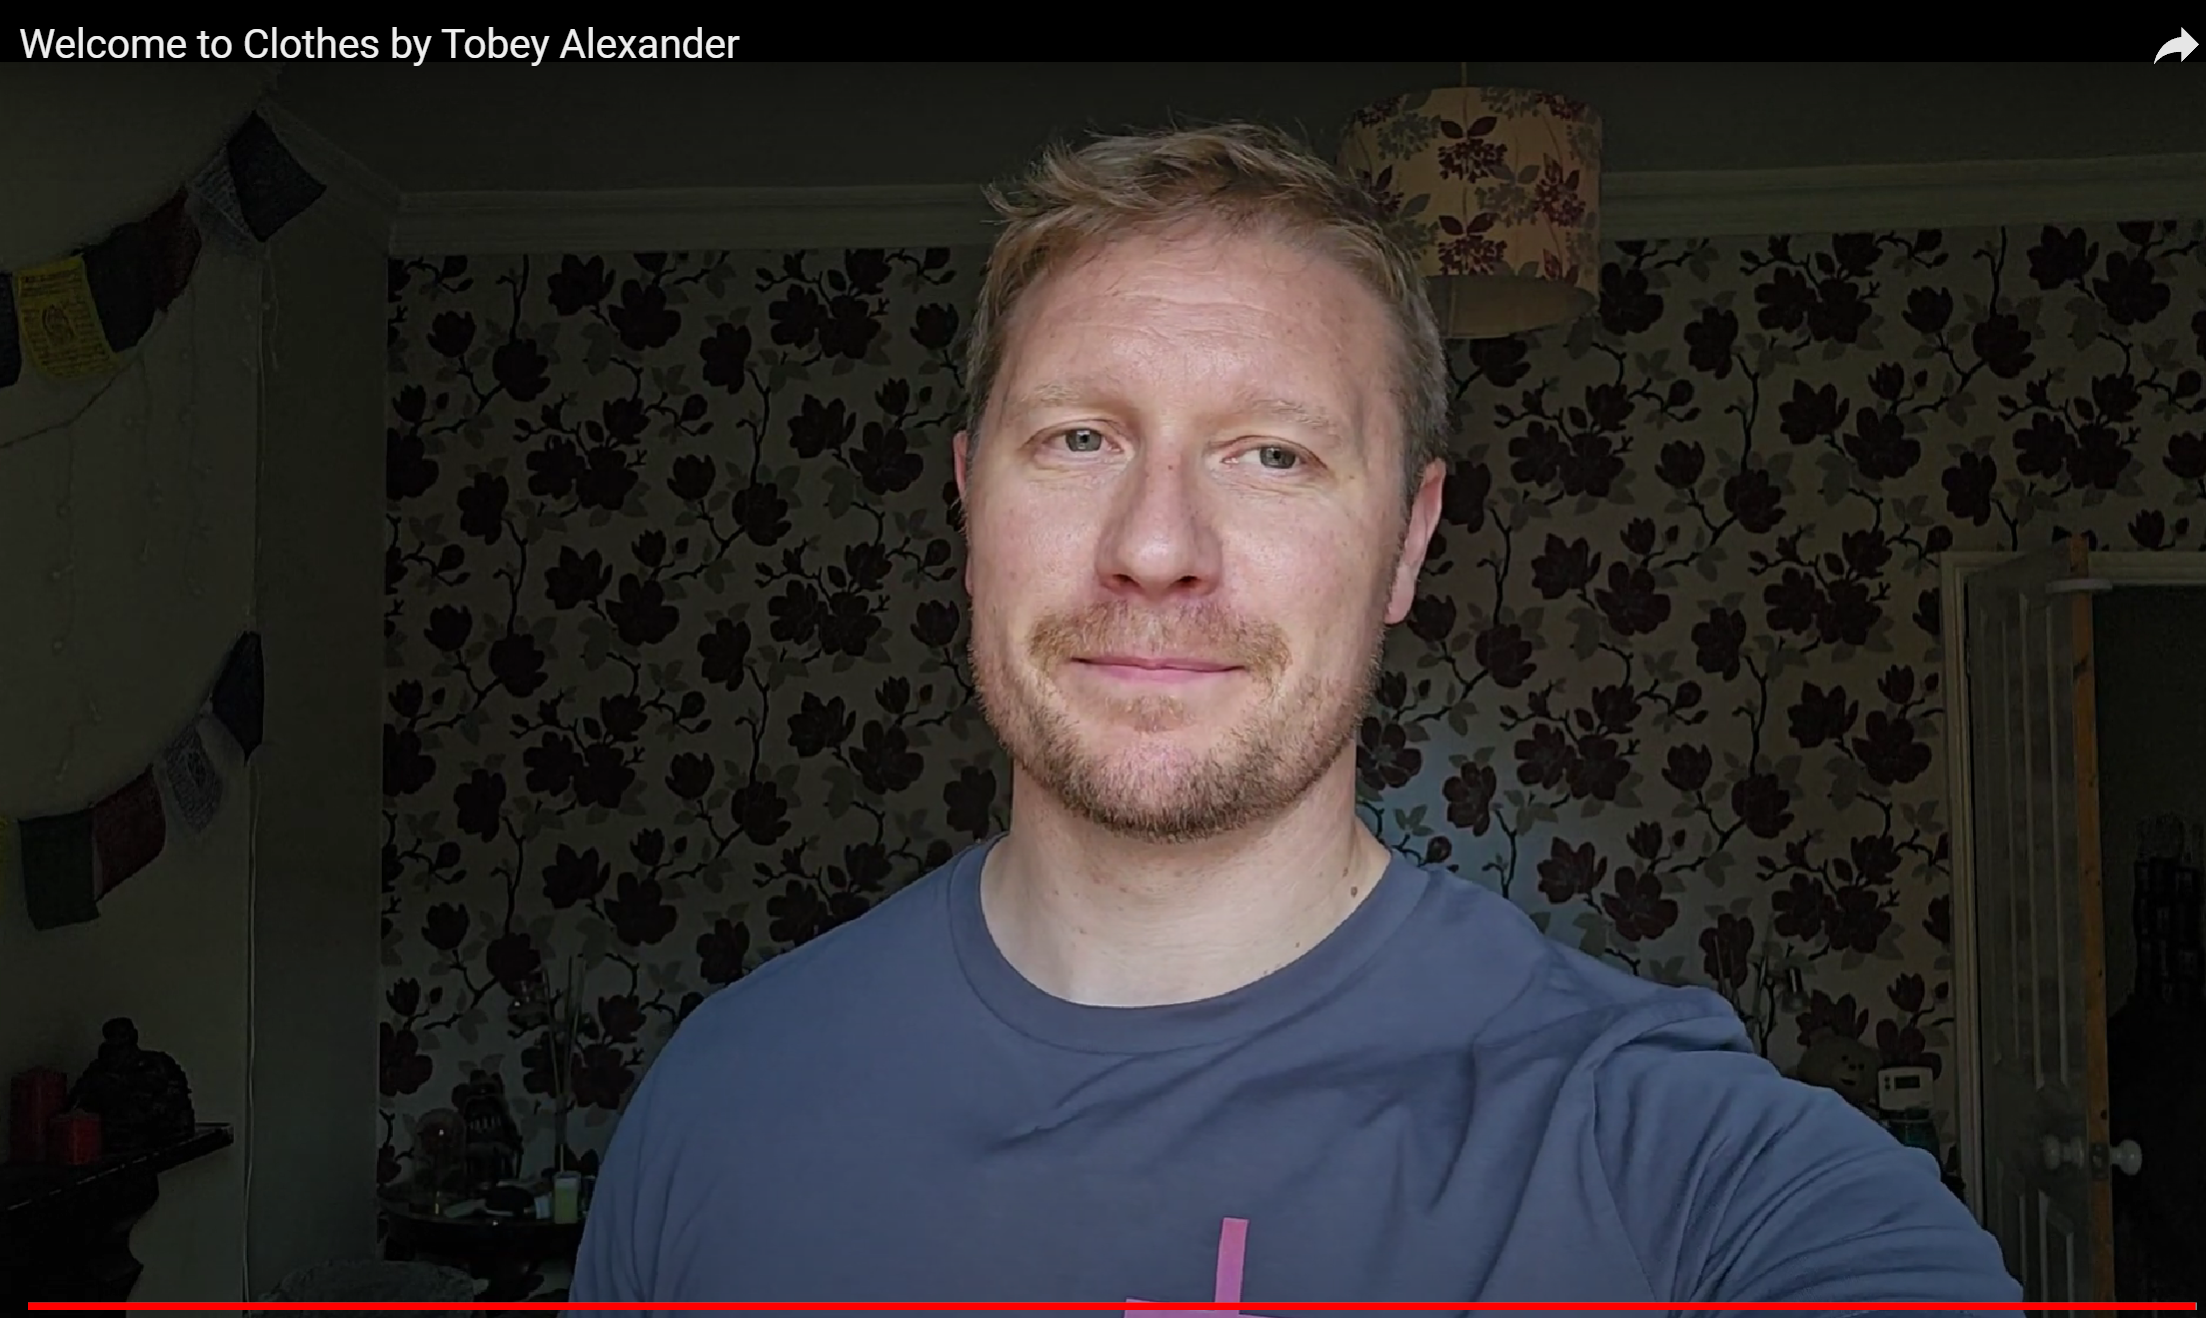 Load video: An introduction from founder Tobey Alexander. Giving his reasons why and motivation of what drives him as a voice for hidden and unseen diversity through clothes, books and talking.